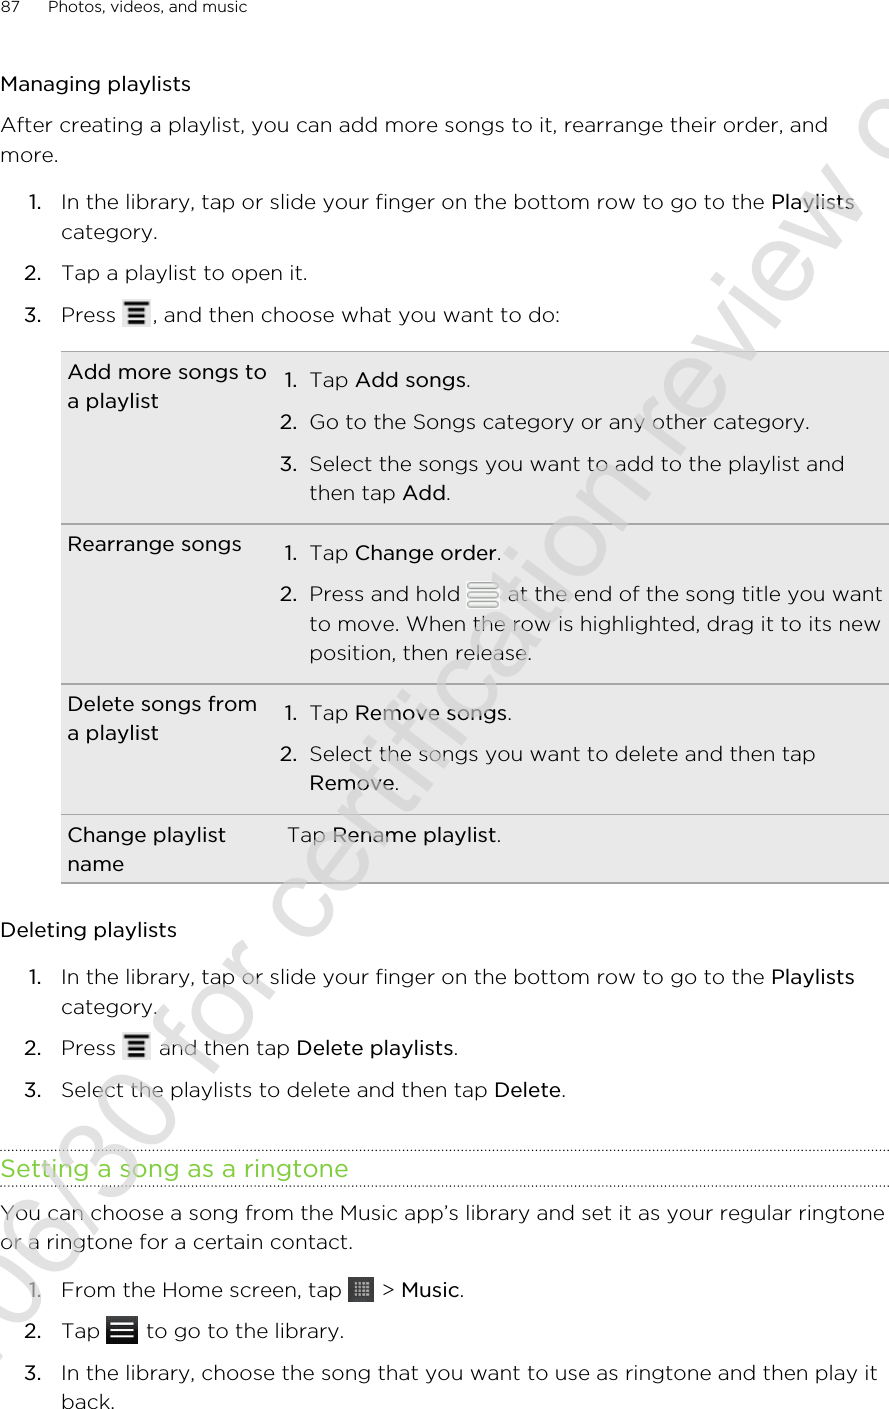 Managing playlistsAfter creating a playlist, you can add more songs to it, rearrange their order, andmore.1. In the library, tap or slide your finger on the bottom row to go to the Playlistscategory.2. Tap a playlist to open it.3. Press  , and then choose what you want to do:Add more songs toa playlist 1. Tap Add songs.2. Go to the Songs category or any other category.3. Select the songs you want to add to the playlist andthen tap Add.Rearrange songs 1. Tap Change order.2. Press and hold   at the end of the song title you wantto move. When the row is highlighted, drag it to its newposition, then release.Delete songs froma playlist 1. Tap Remove songs.2. Select the songs you want to delete and then tapRemove.Change playlistnameTap Rename playlist.Deleting playlists1. In the library, tap or slide your finger on the bottom row to go to the Playlistscategory.2. Press   and then tap Delete playlists.3. Select the playlists to delete and then tap Delete.Setting a song as a ringtoneYou can choose a song from the Music app’s library and set it as your regular ringtoneor a ringtone for a certain contact.1. From the Home screen, tap   &gt; Music.2. Tap   to go to the library.3. In the library, choose the song that you want to use as ringtone and then play itback.87 Photos, videos, and music2011/06/30 for certification review only